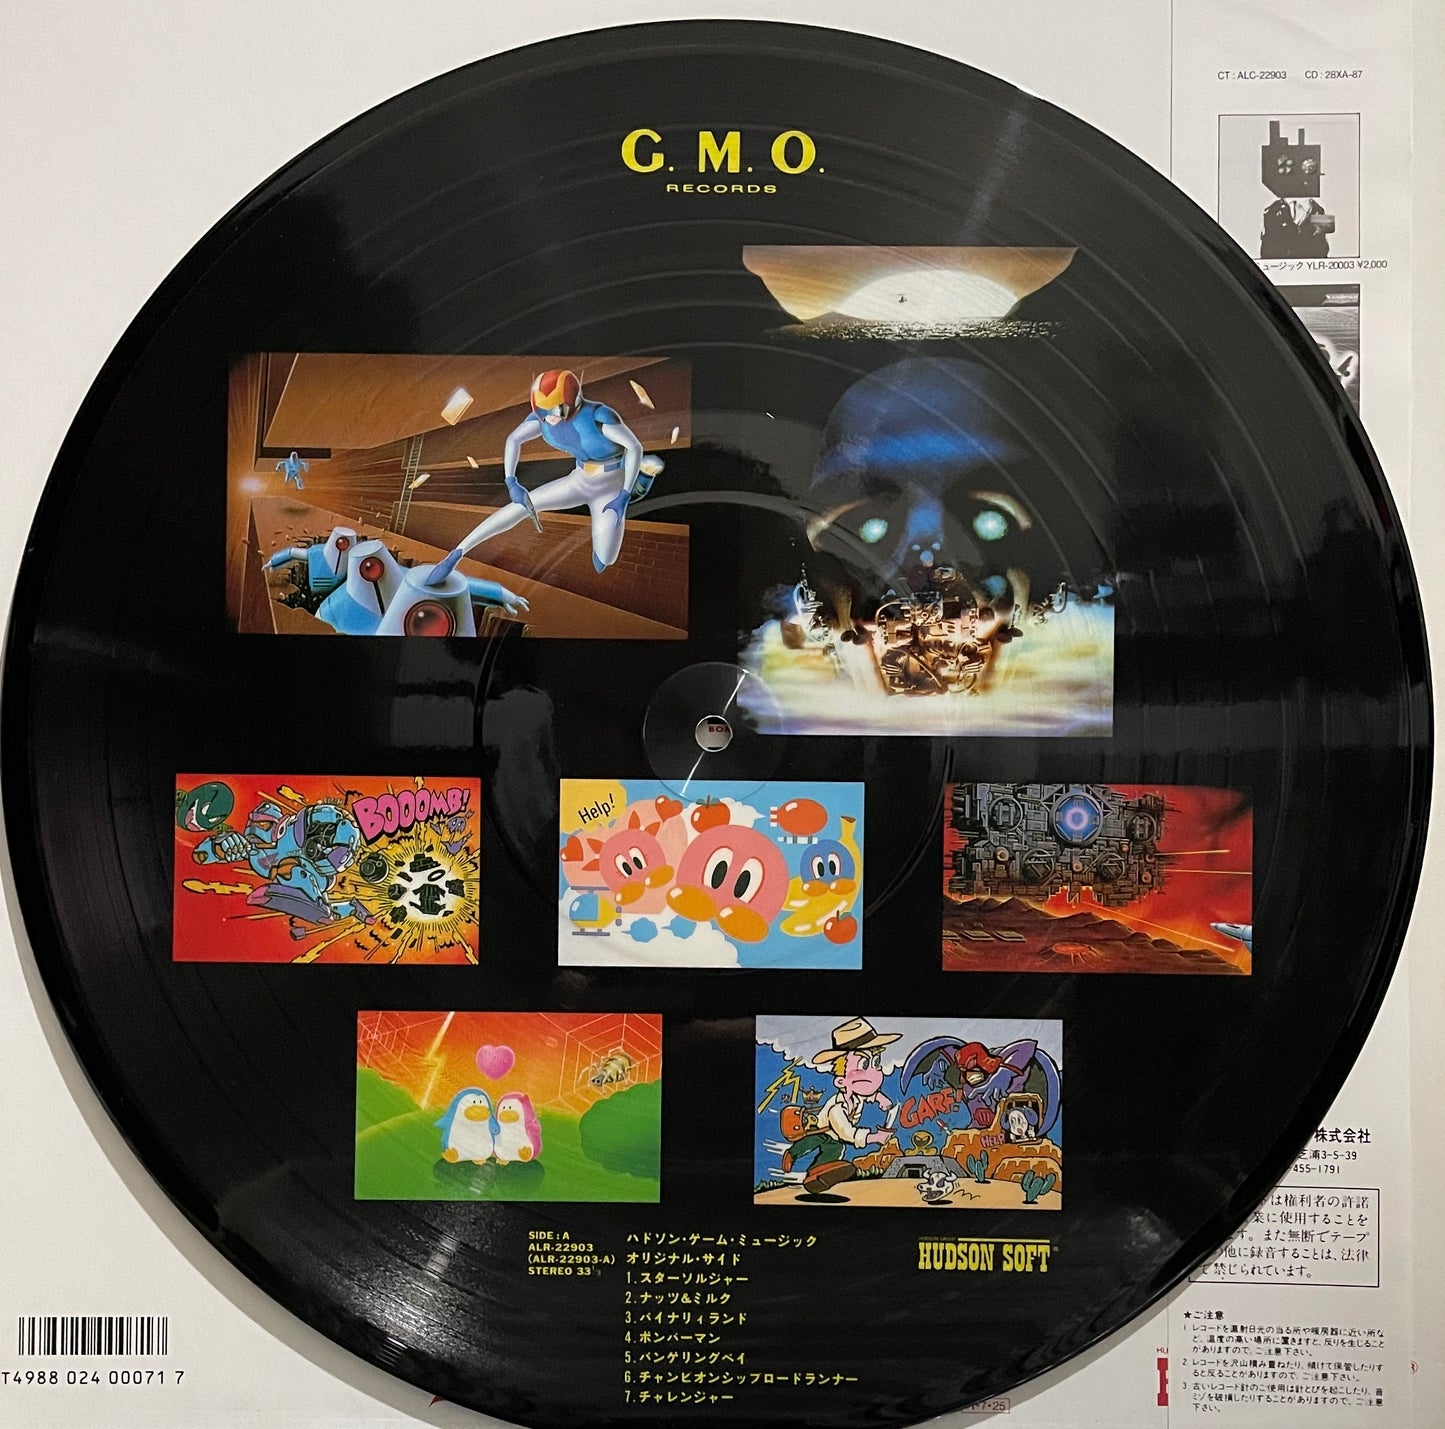 Hudson Game Music - Picture Disc (1986)